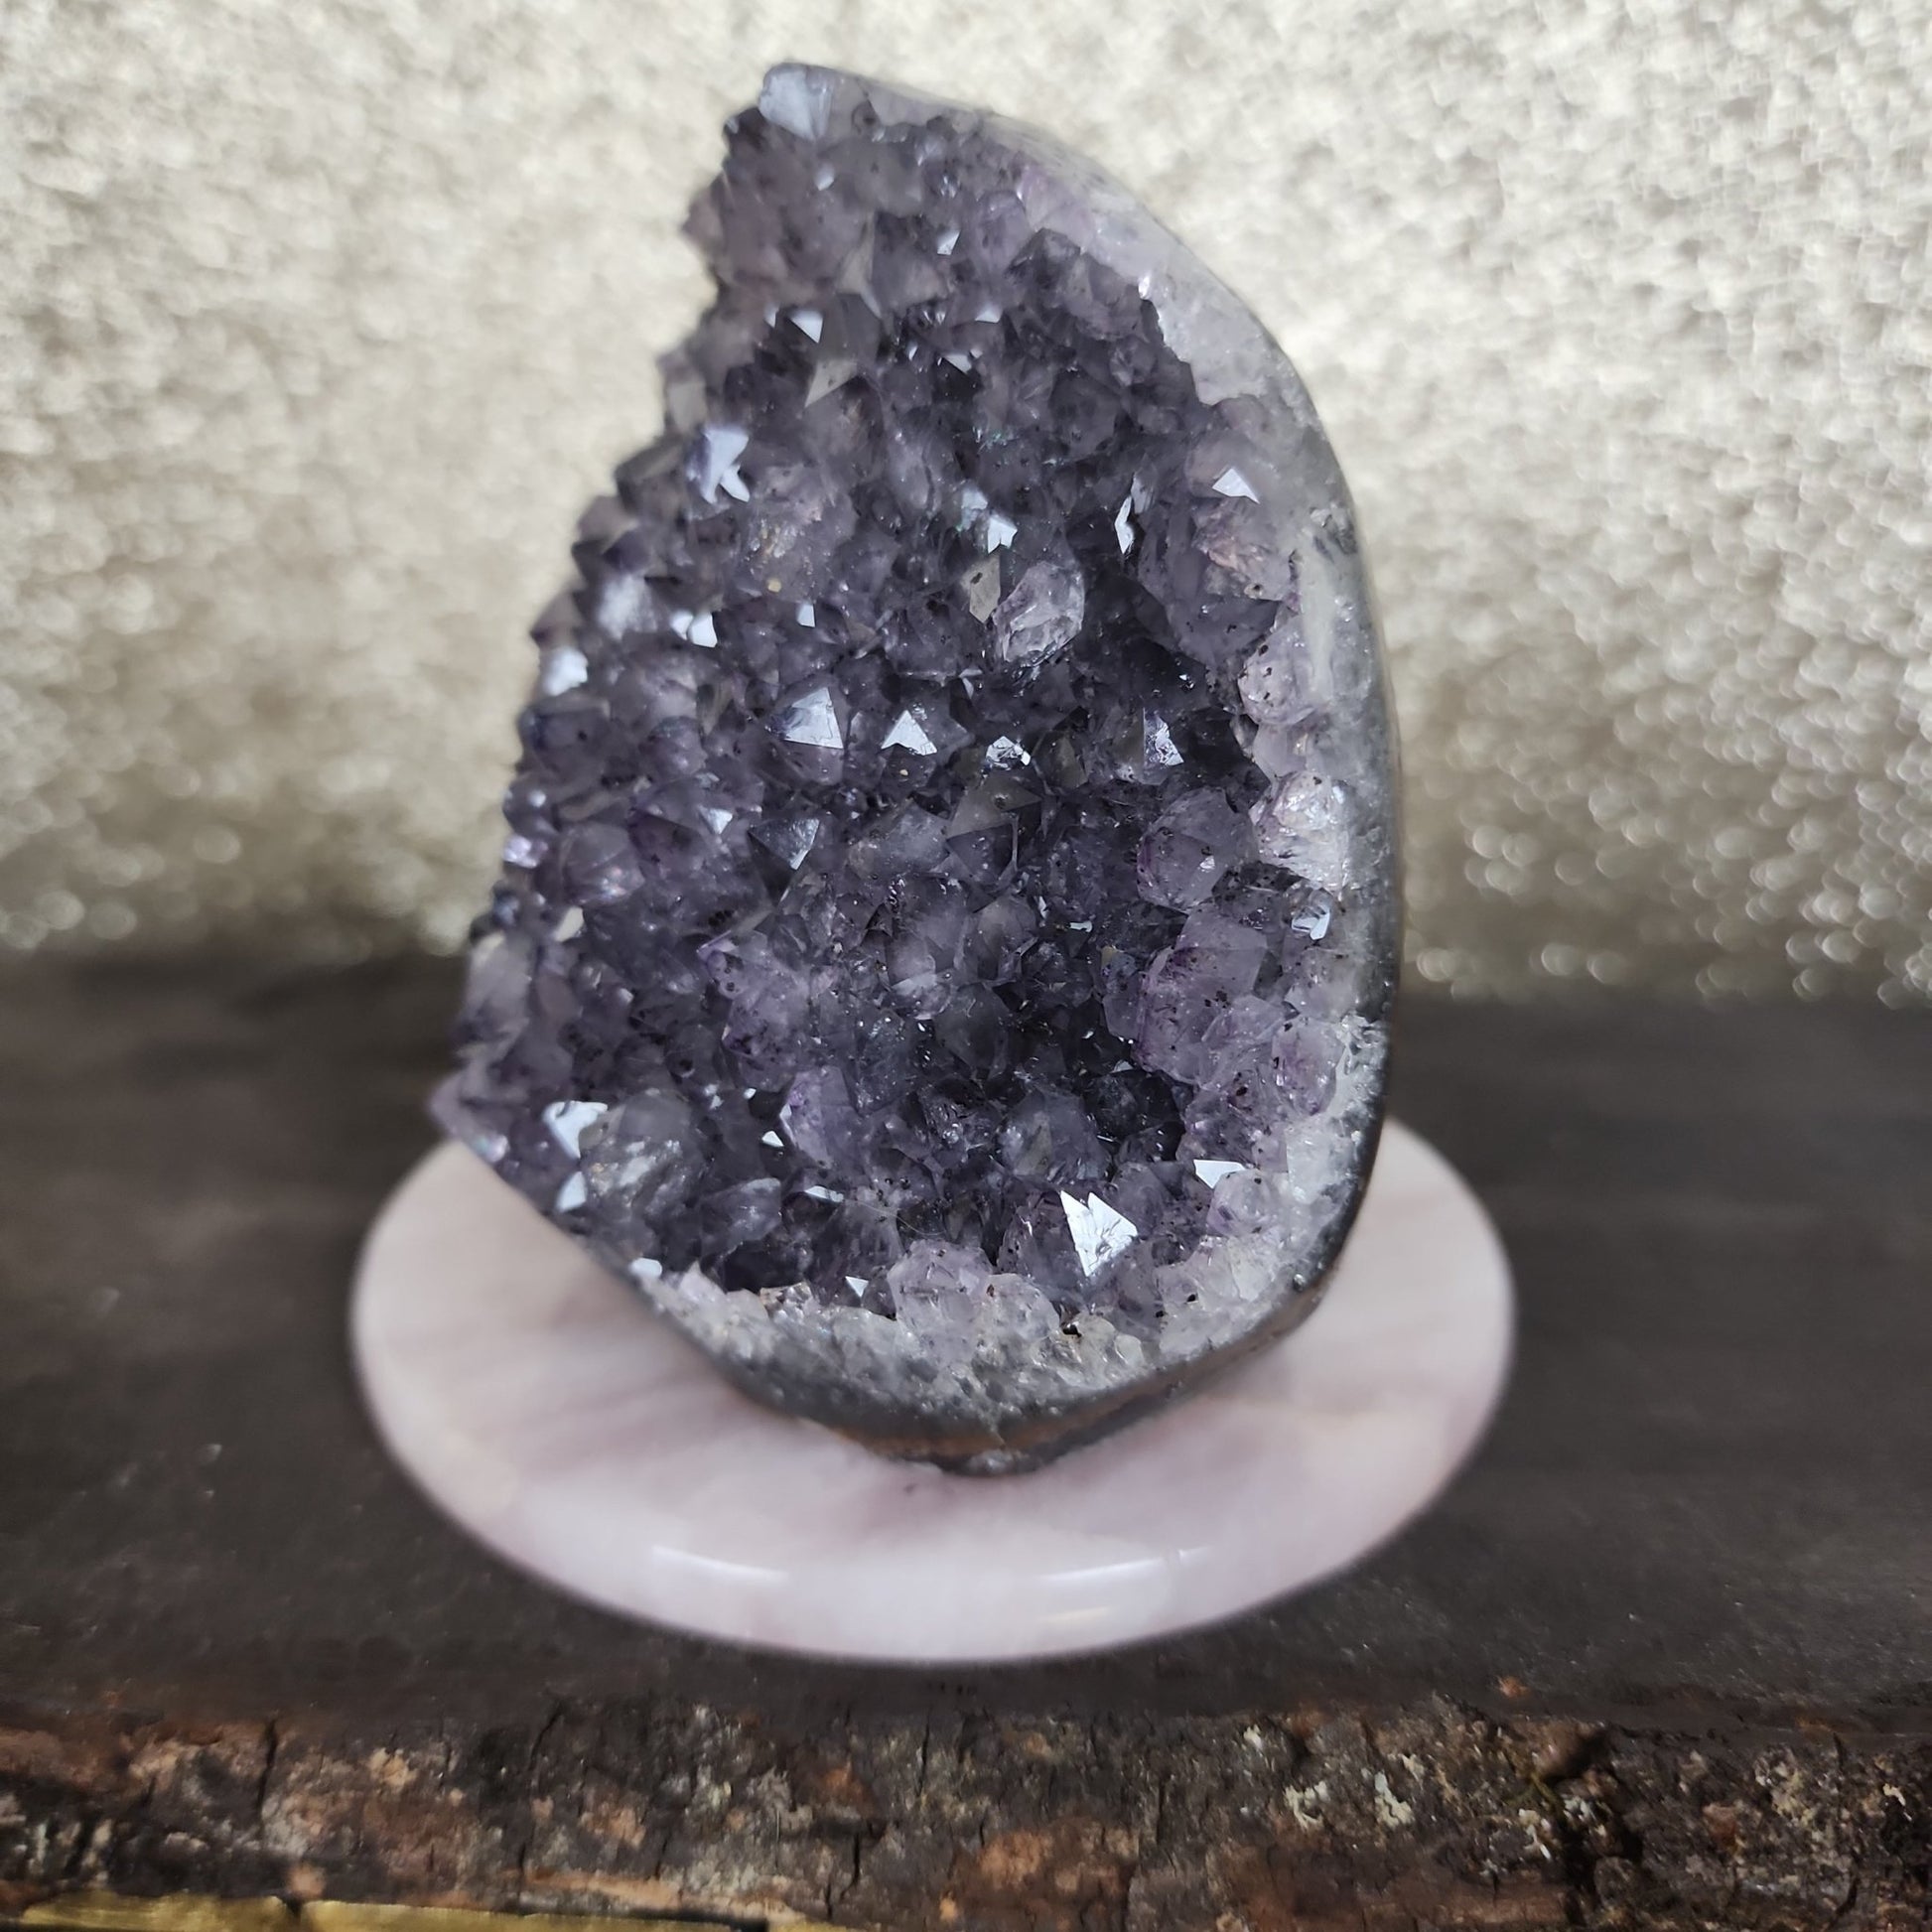 Amethyst Geode - MagicBox Crystals